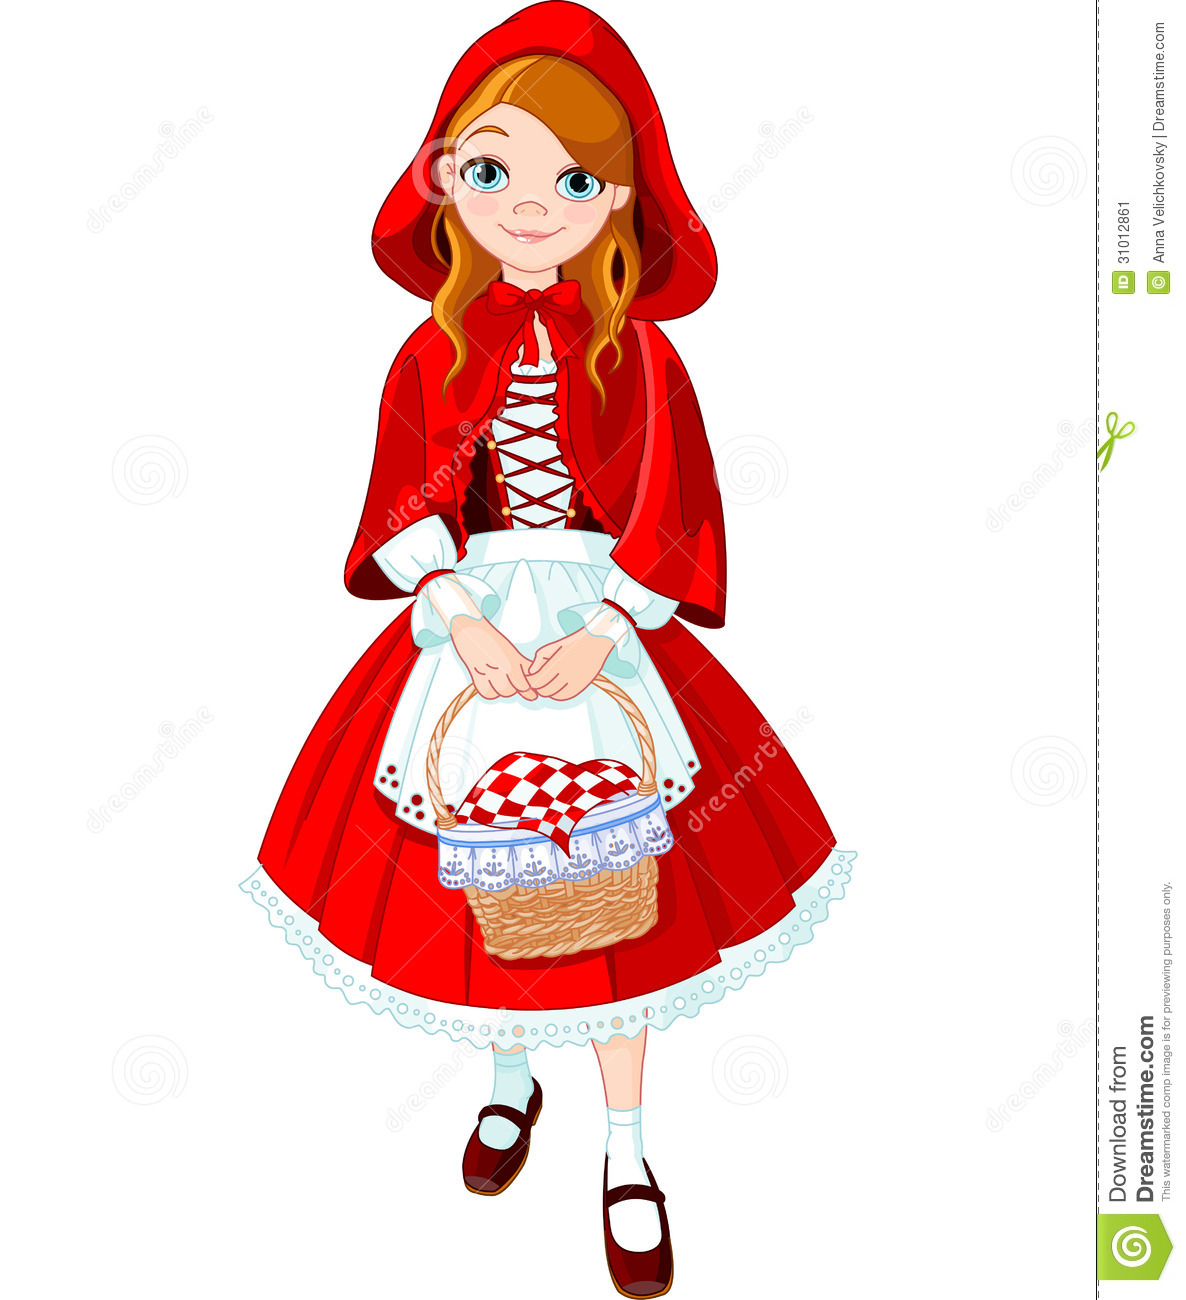 Little Red Riding Hood Stock Image   Image  31012861